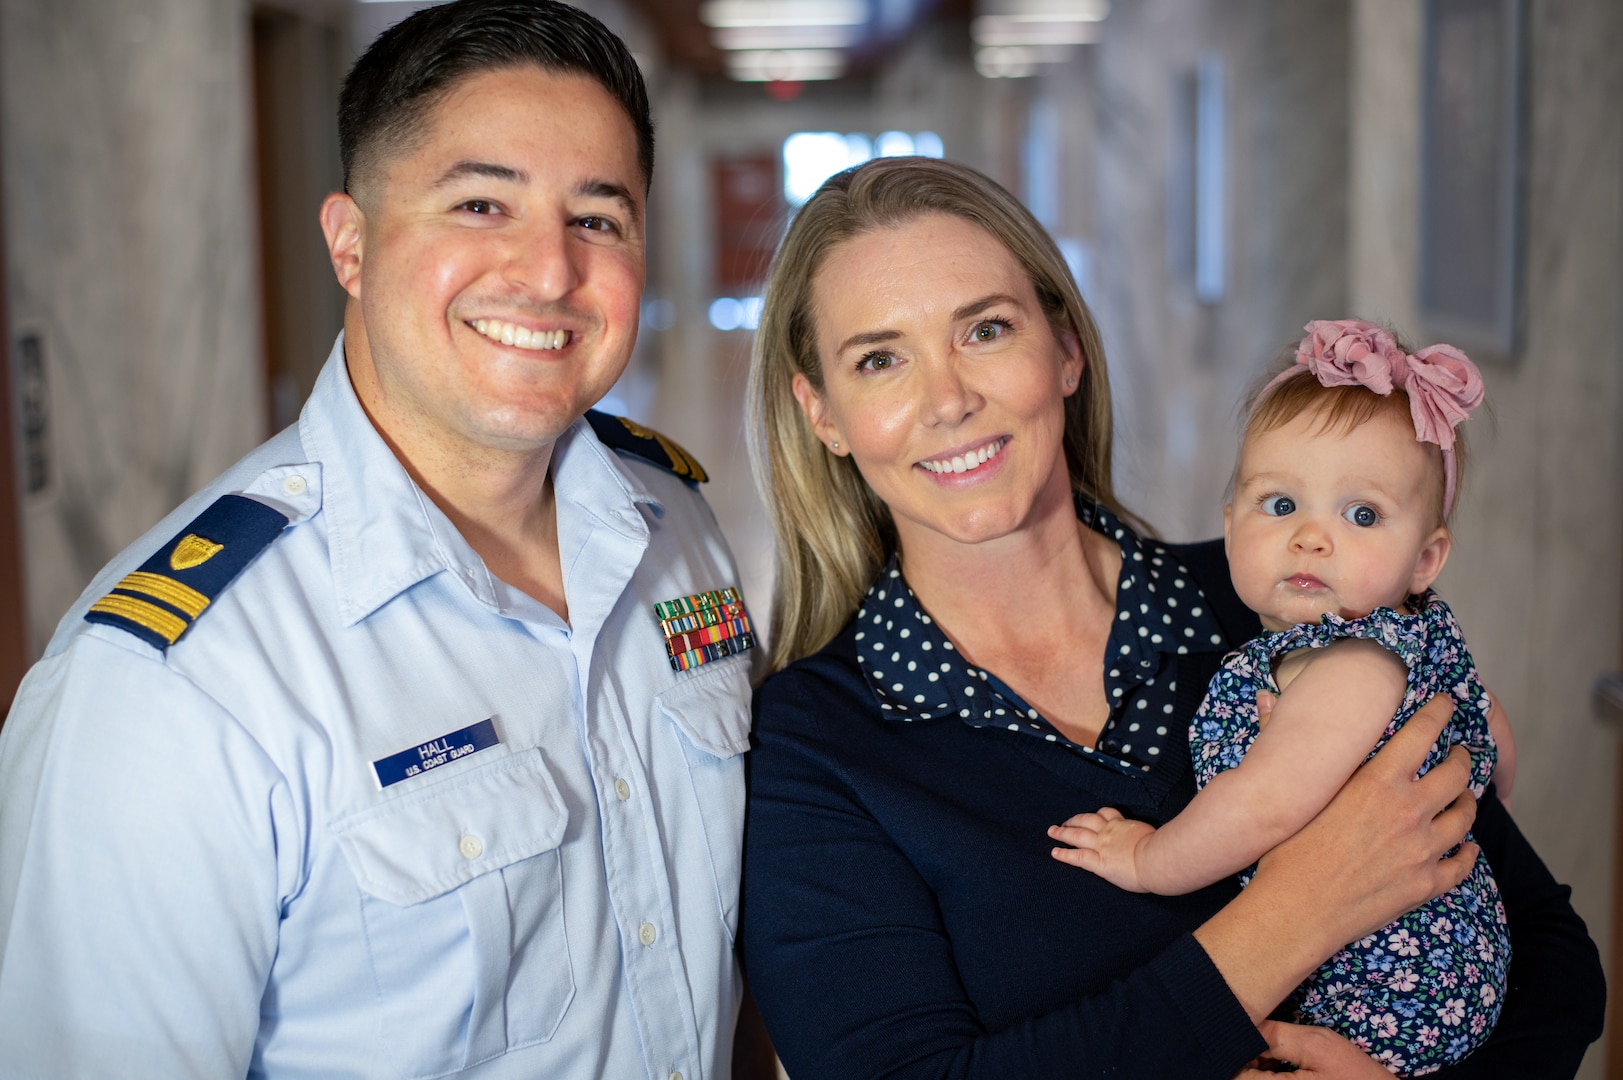 Coast Guard Lt. Coty Hall, command intelligence officer at Sector Houston-Galveston, Jenna Hall, Sector Houston-Galveston’s ombudsman and winner of the 2022 Wanda Allen-Yearout Ombudsman of the Year Award, and Adilyn, the couple’s 6-month-old daughter, pose for a portrait at the sector, April 13, 2023. Hall previously won the award in 2019 for her work as Sector Los Angeles-Long Beach’s ombudsman. (U.S. Coast Guard photo by Petty Officer 1st Class Corinne Zilnicki)